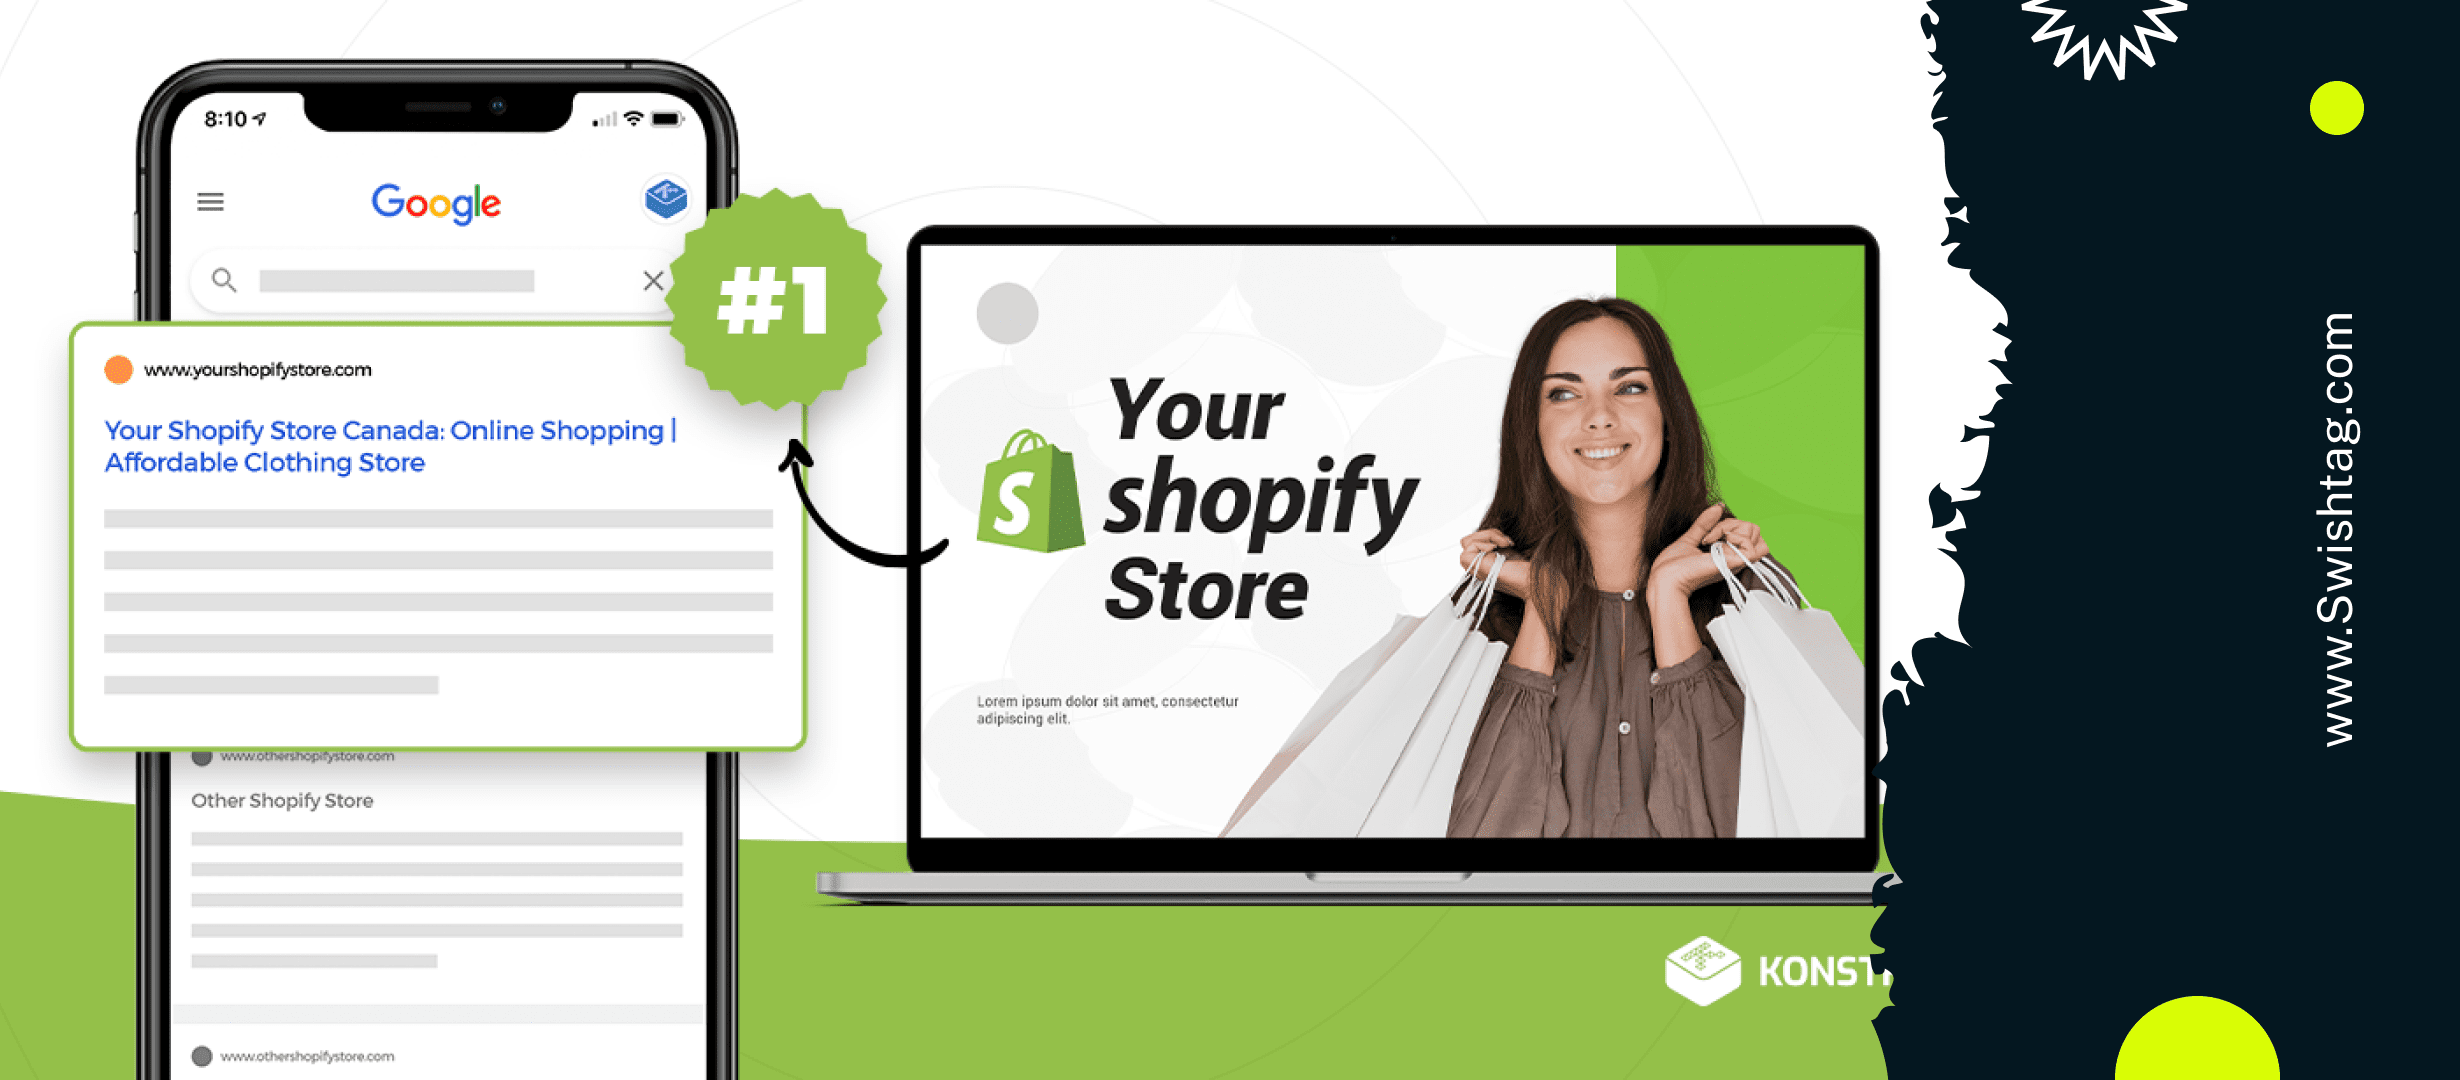 7- Reasons Why You Should Build Your Shopify Store in 2023